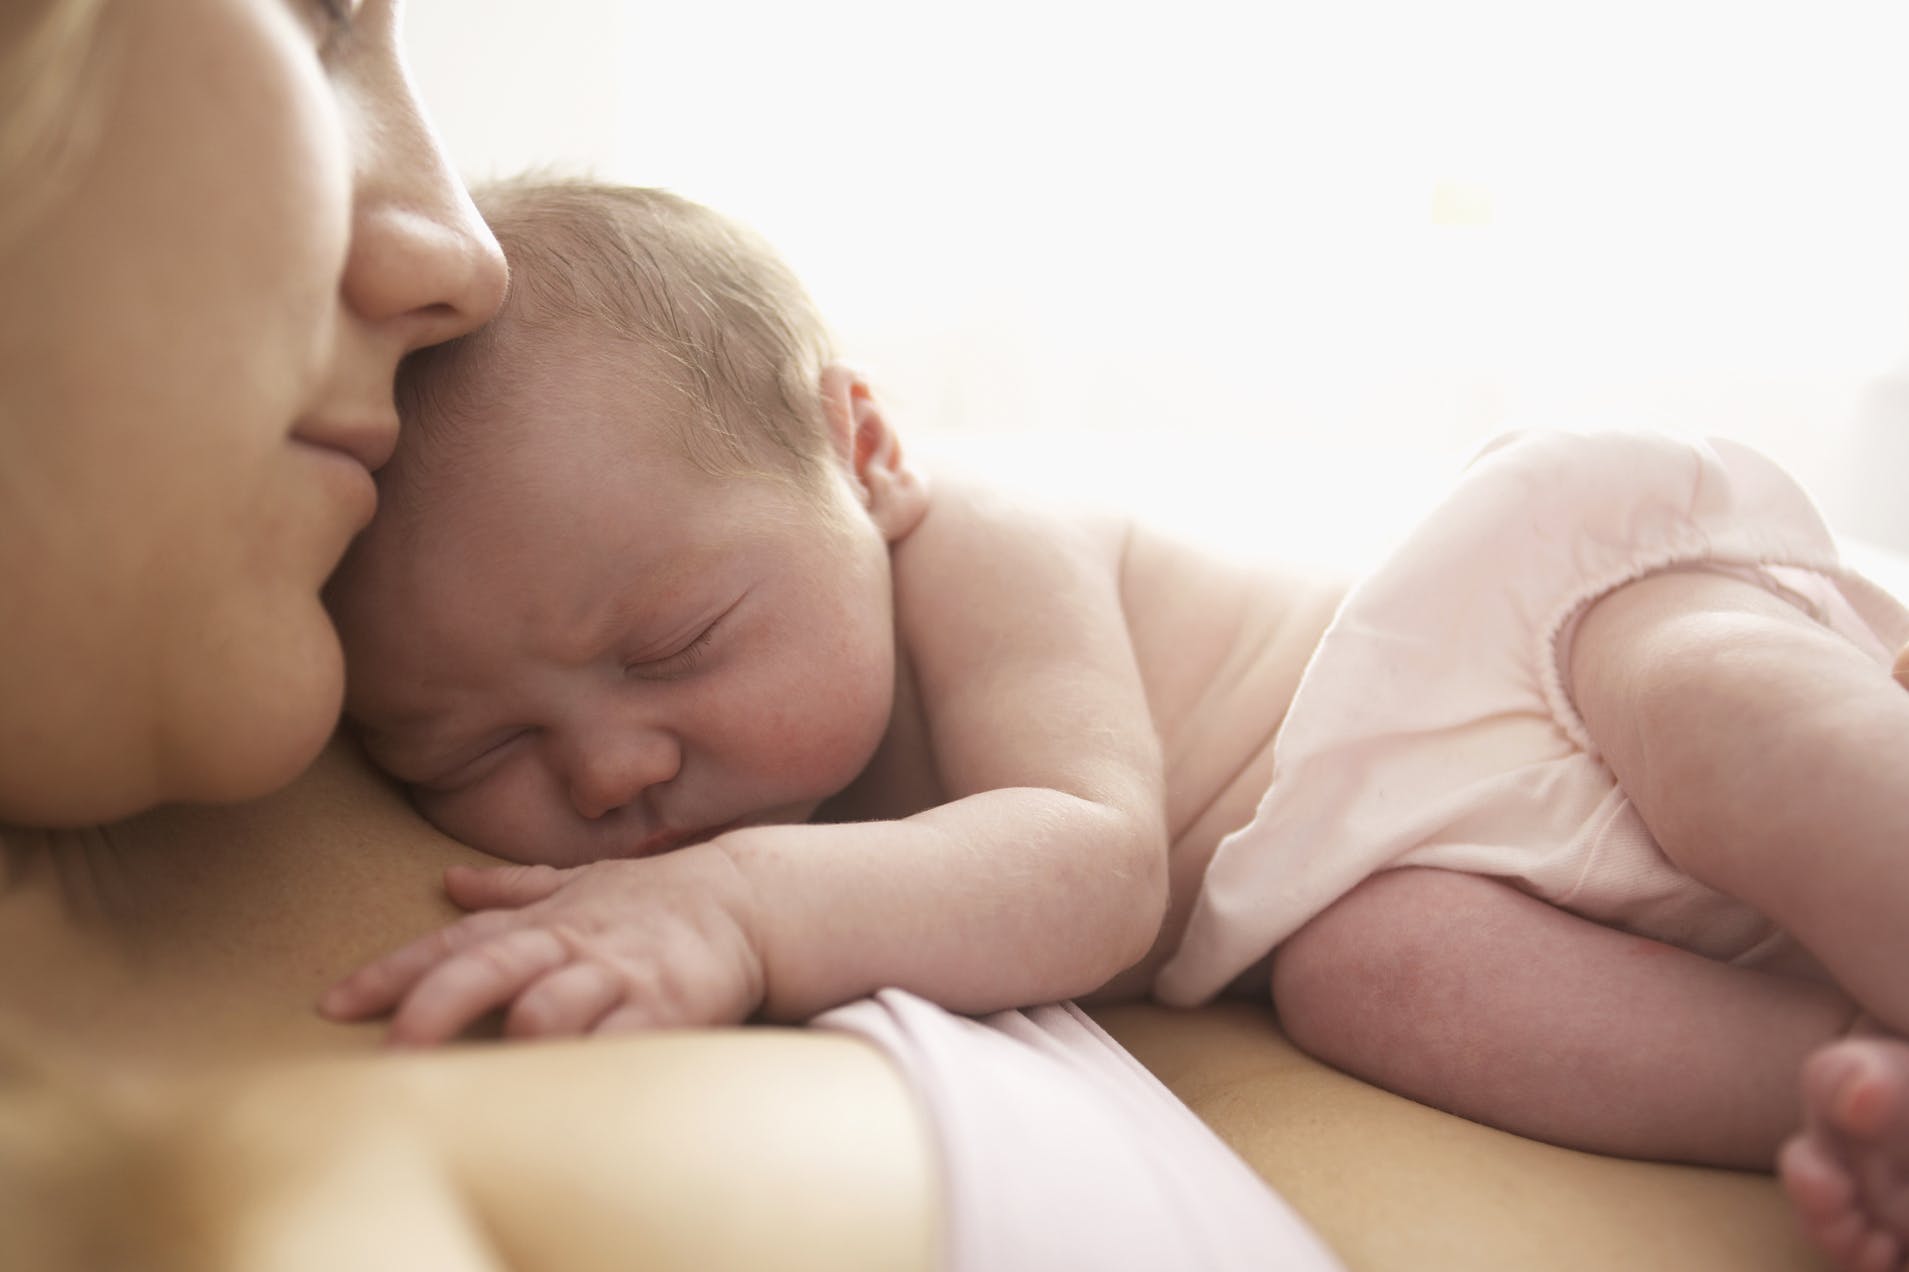 This Way Of Interacting With Your Baby Has Been Proven To Provide Countless Benefits